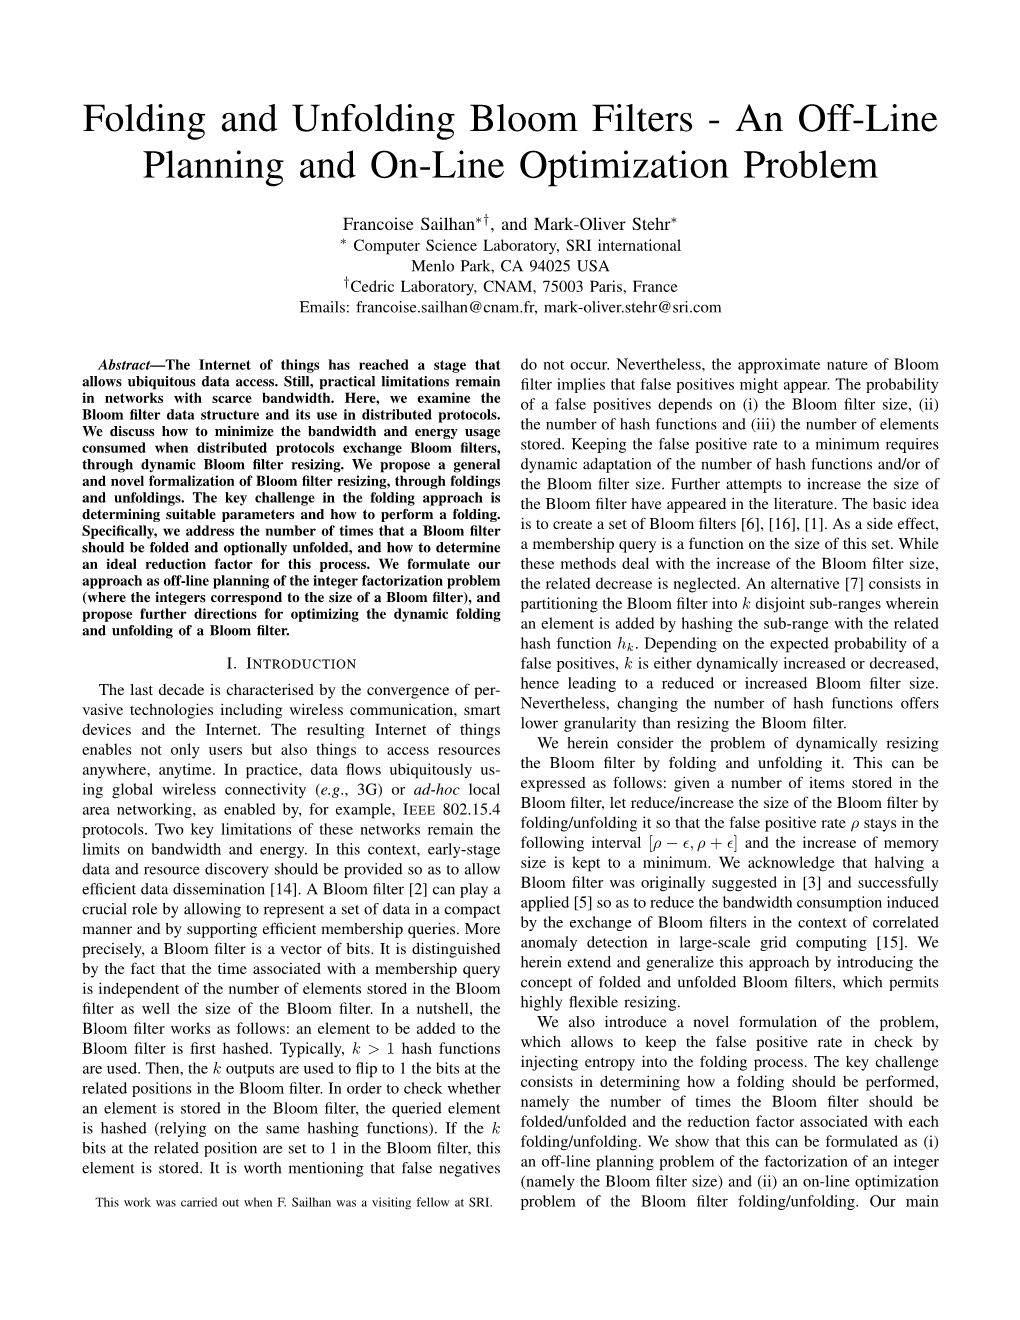 Folding and Unfolding Bloom Filters - an Off-Line Planning and On-Line Optimization Problem